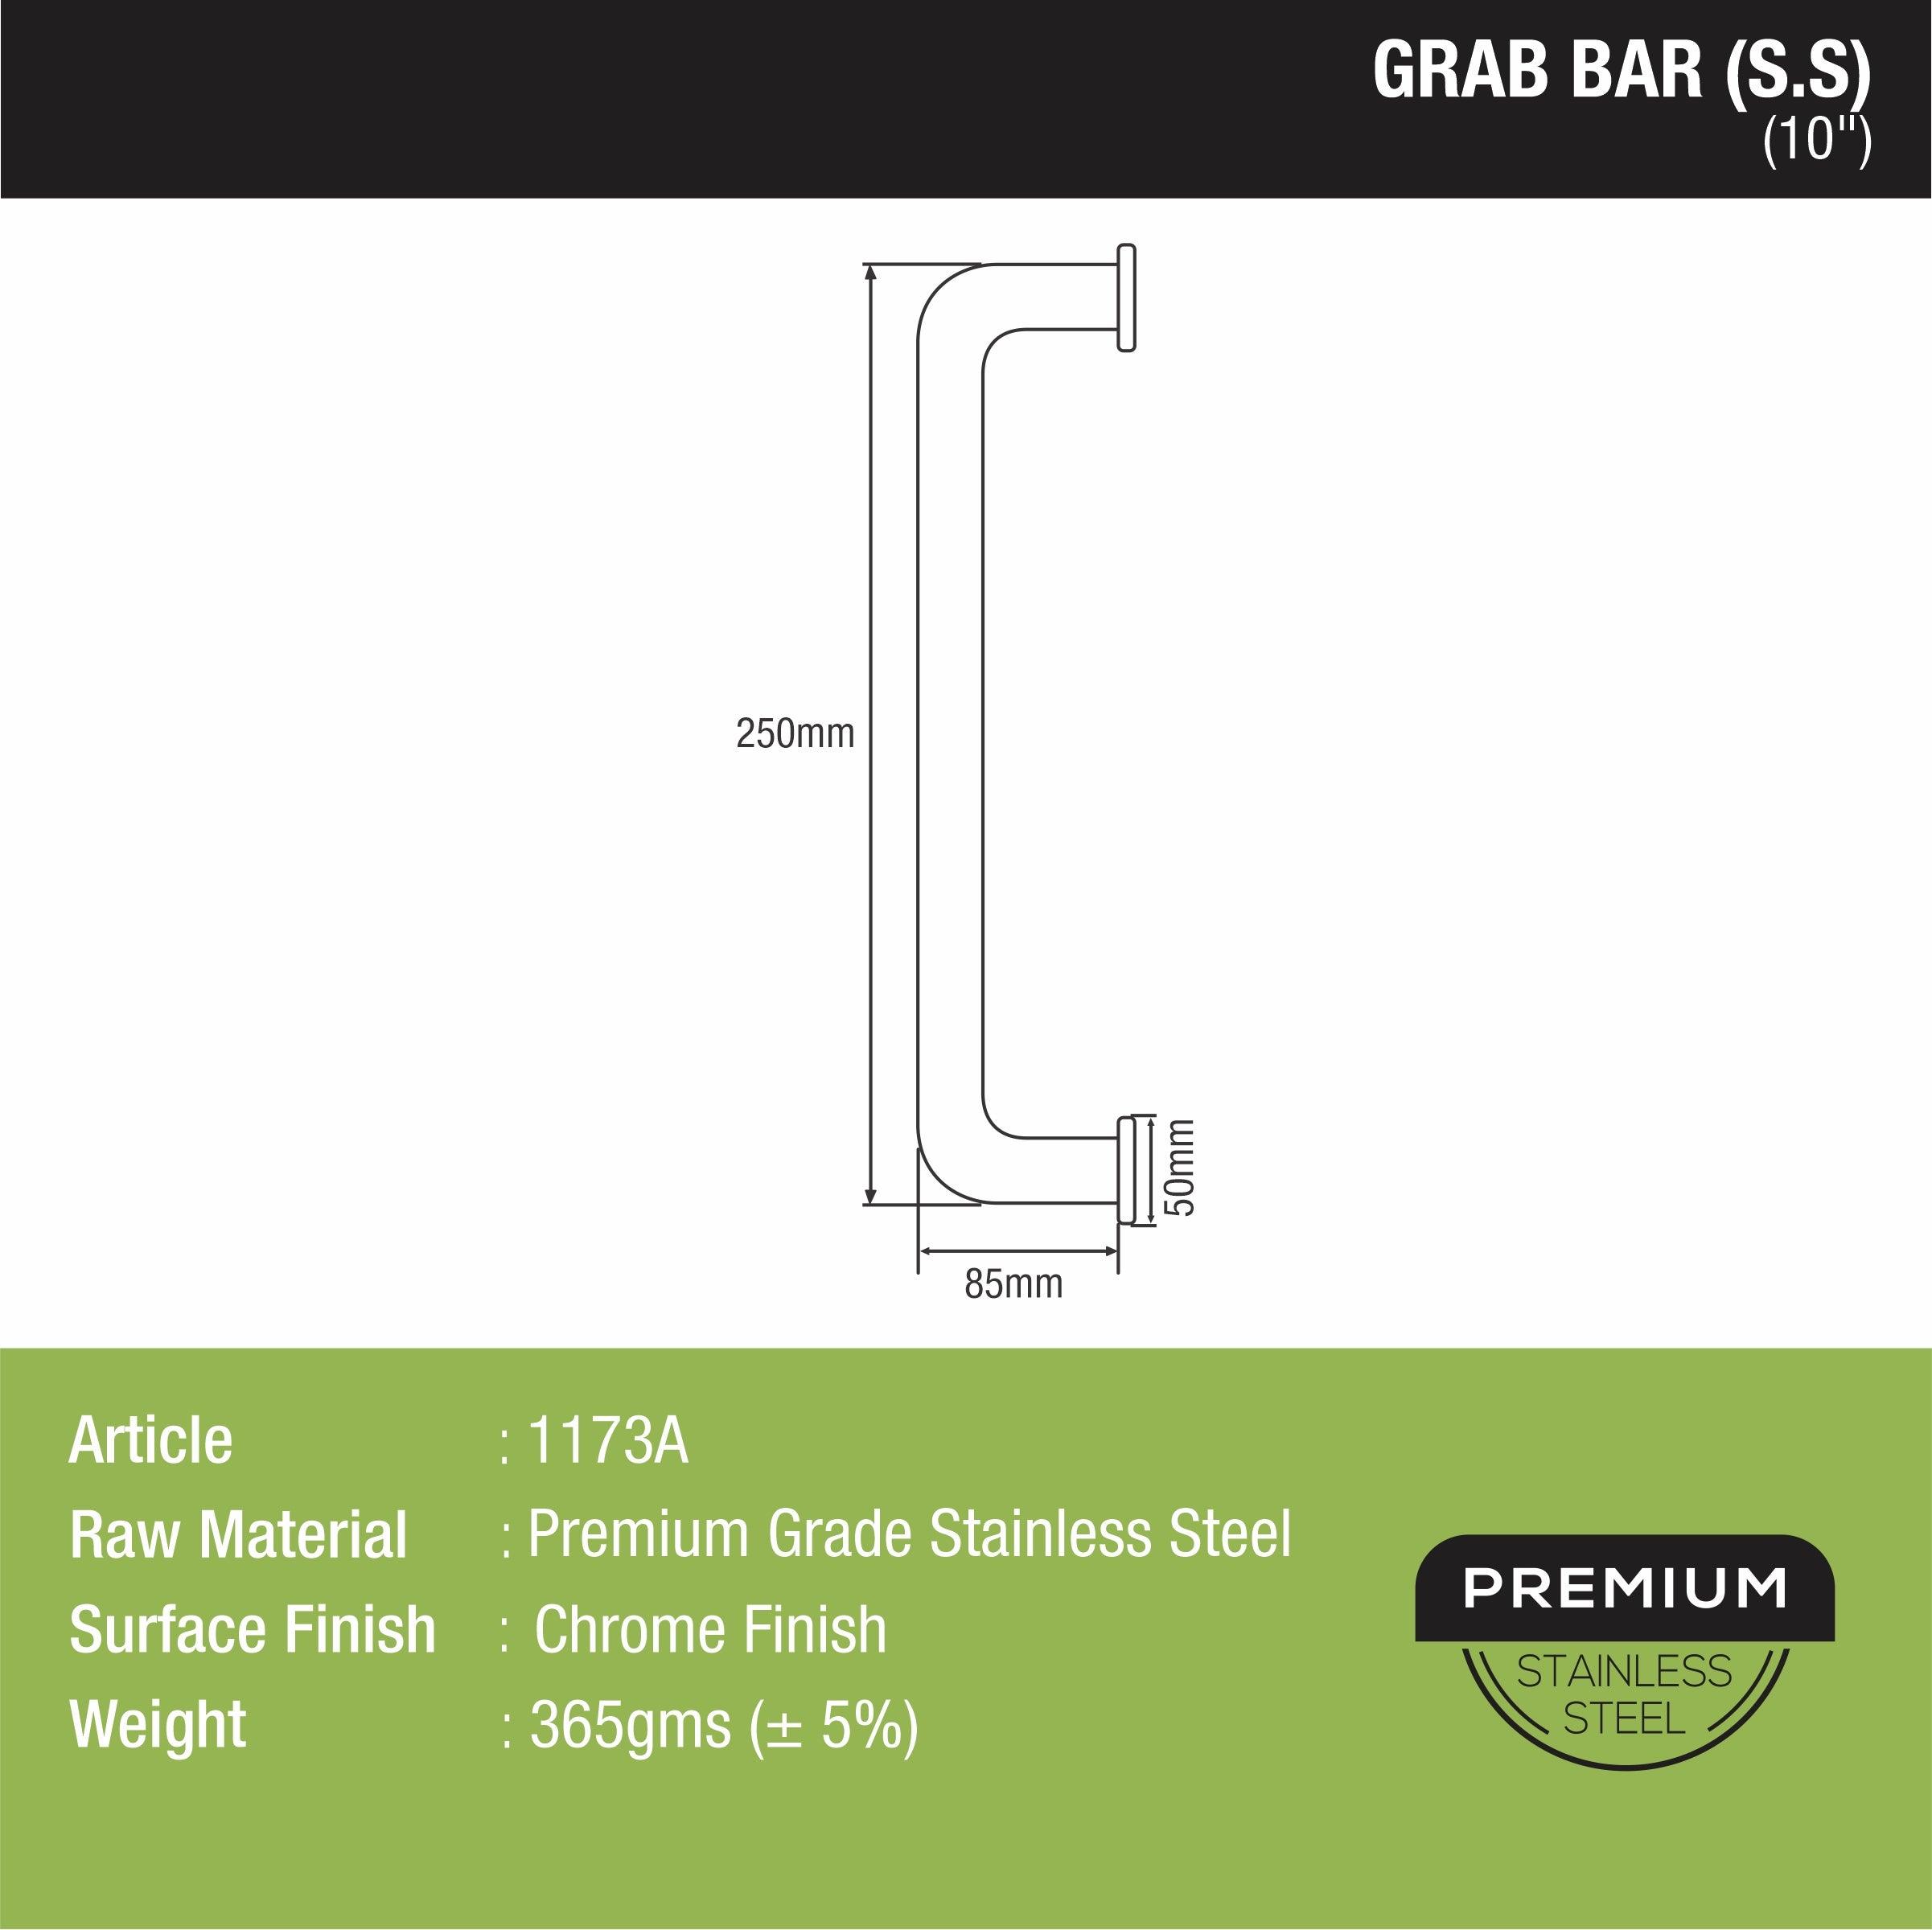 Stainless Steel Grab Bar (10 Inches) sizes and dimensions